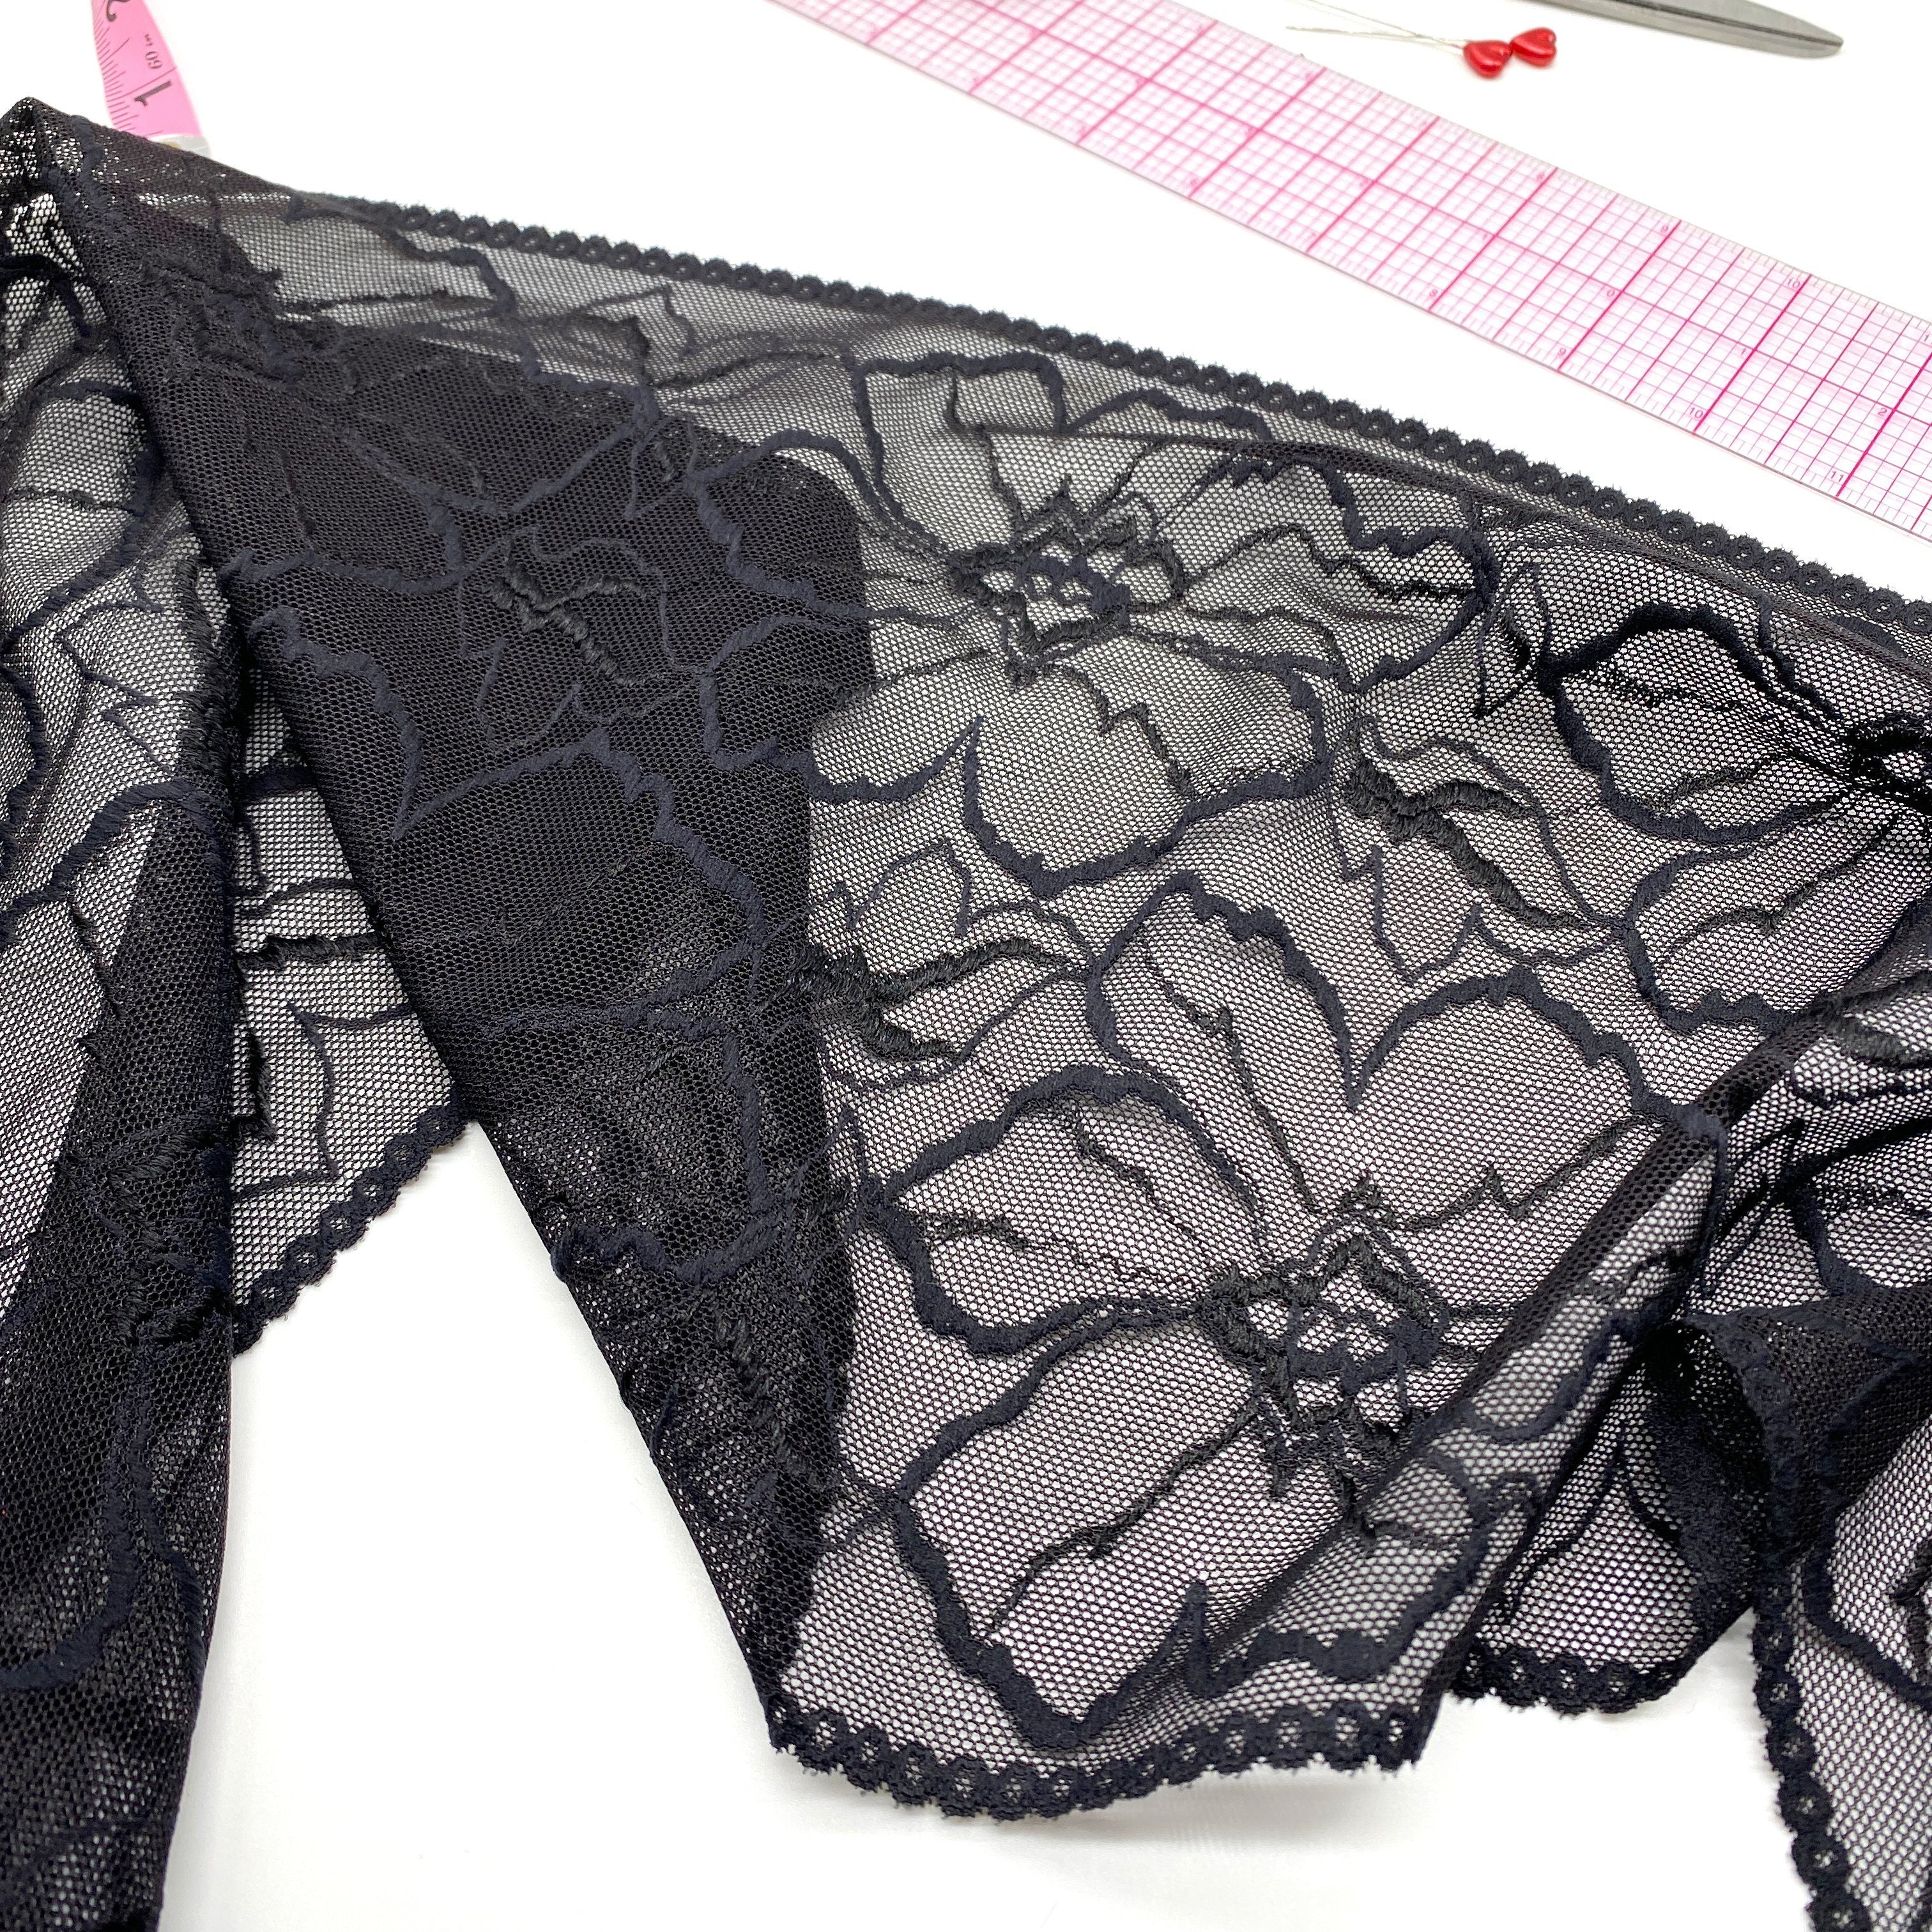 9" (23cm) Stretch Lace, Soft, High Quality in Black, White, Black-Pink or Wine-Pink- by the 1 yard-Stitch Love Studio